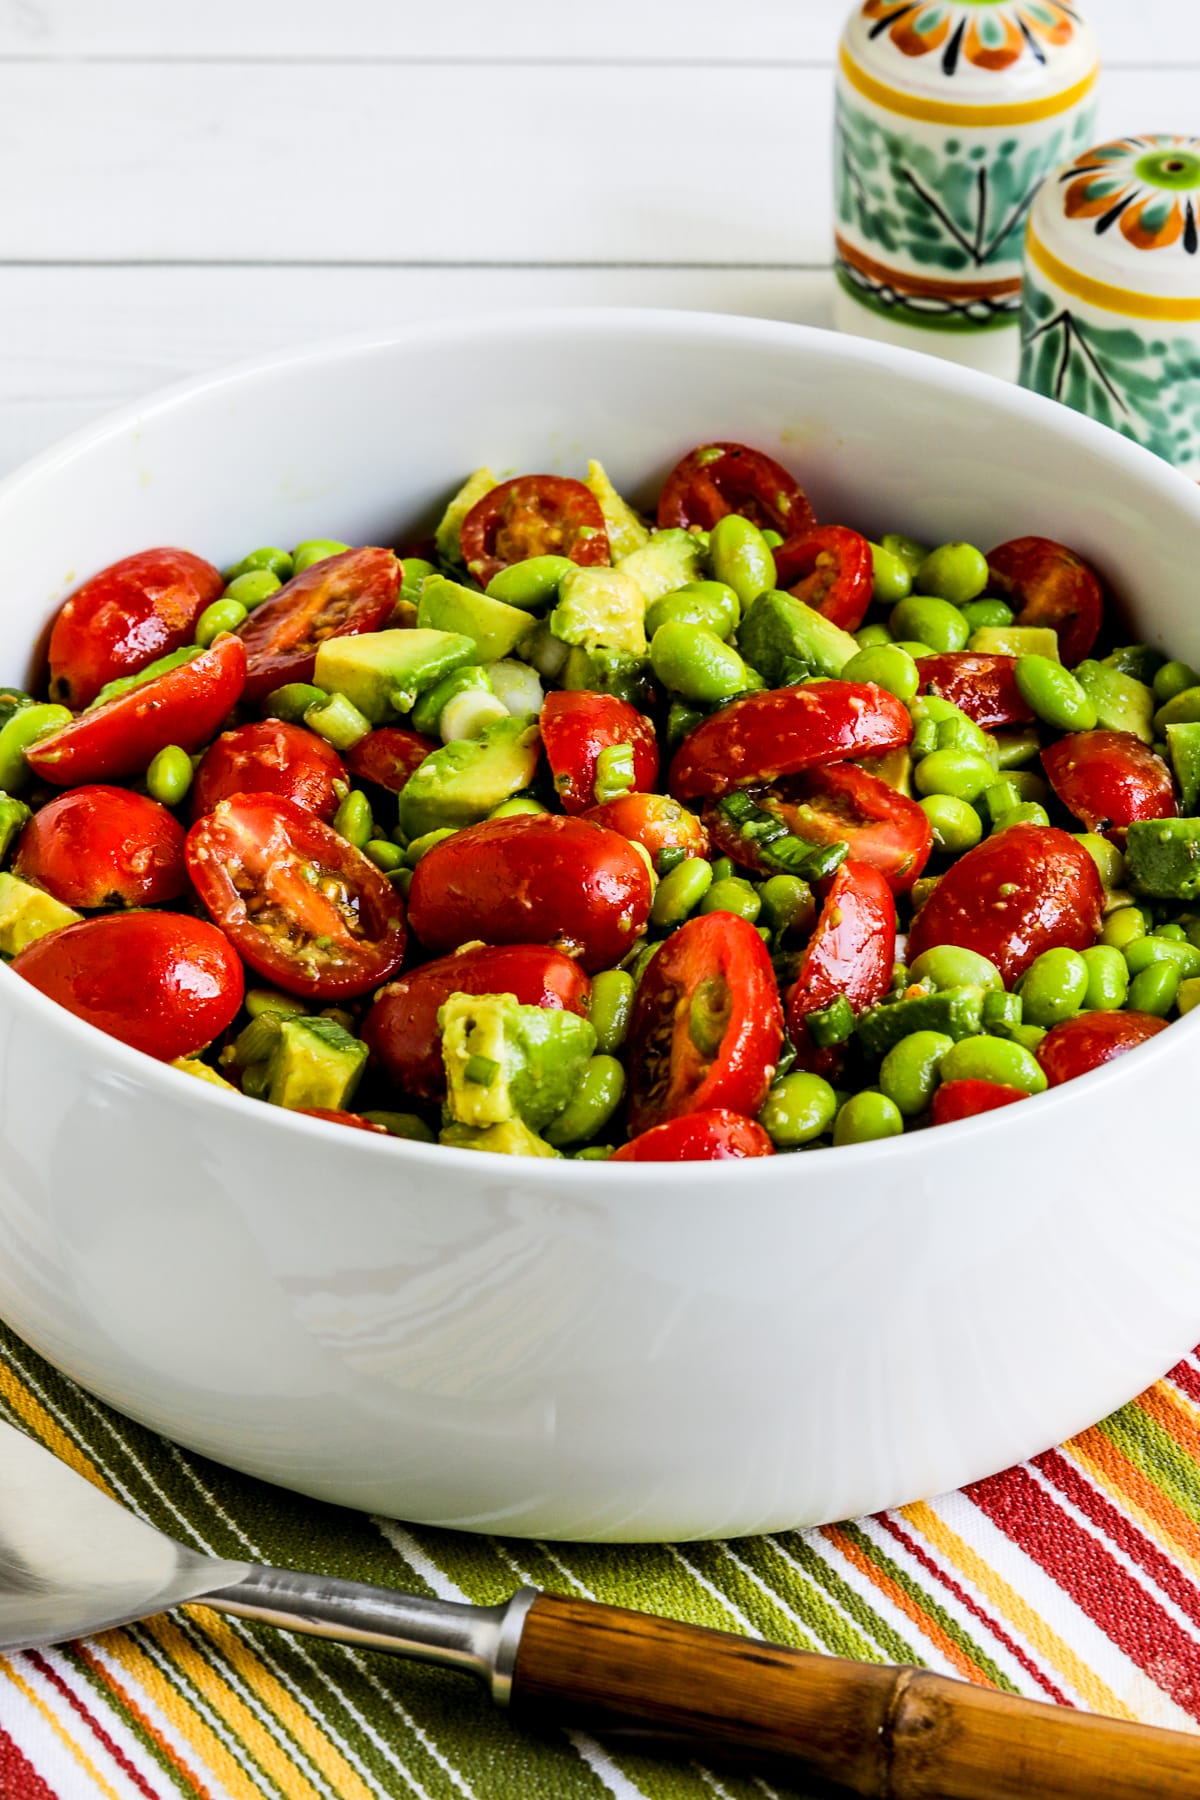 Tomato Avocado Salad with Edamame shown in large serving bowl with serving fork.